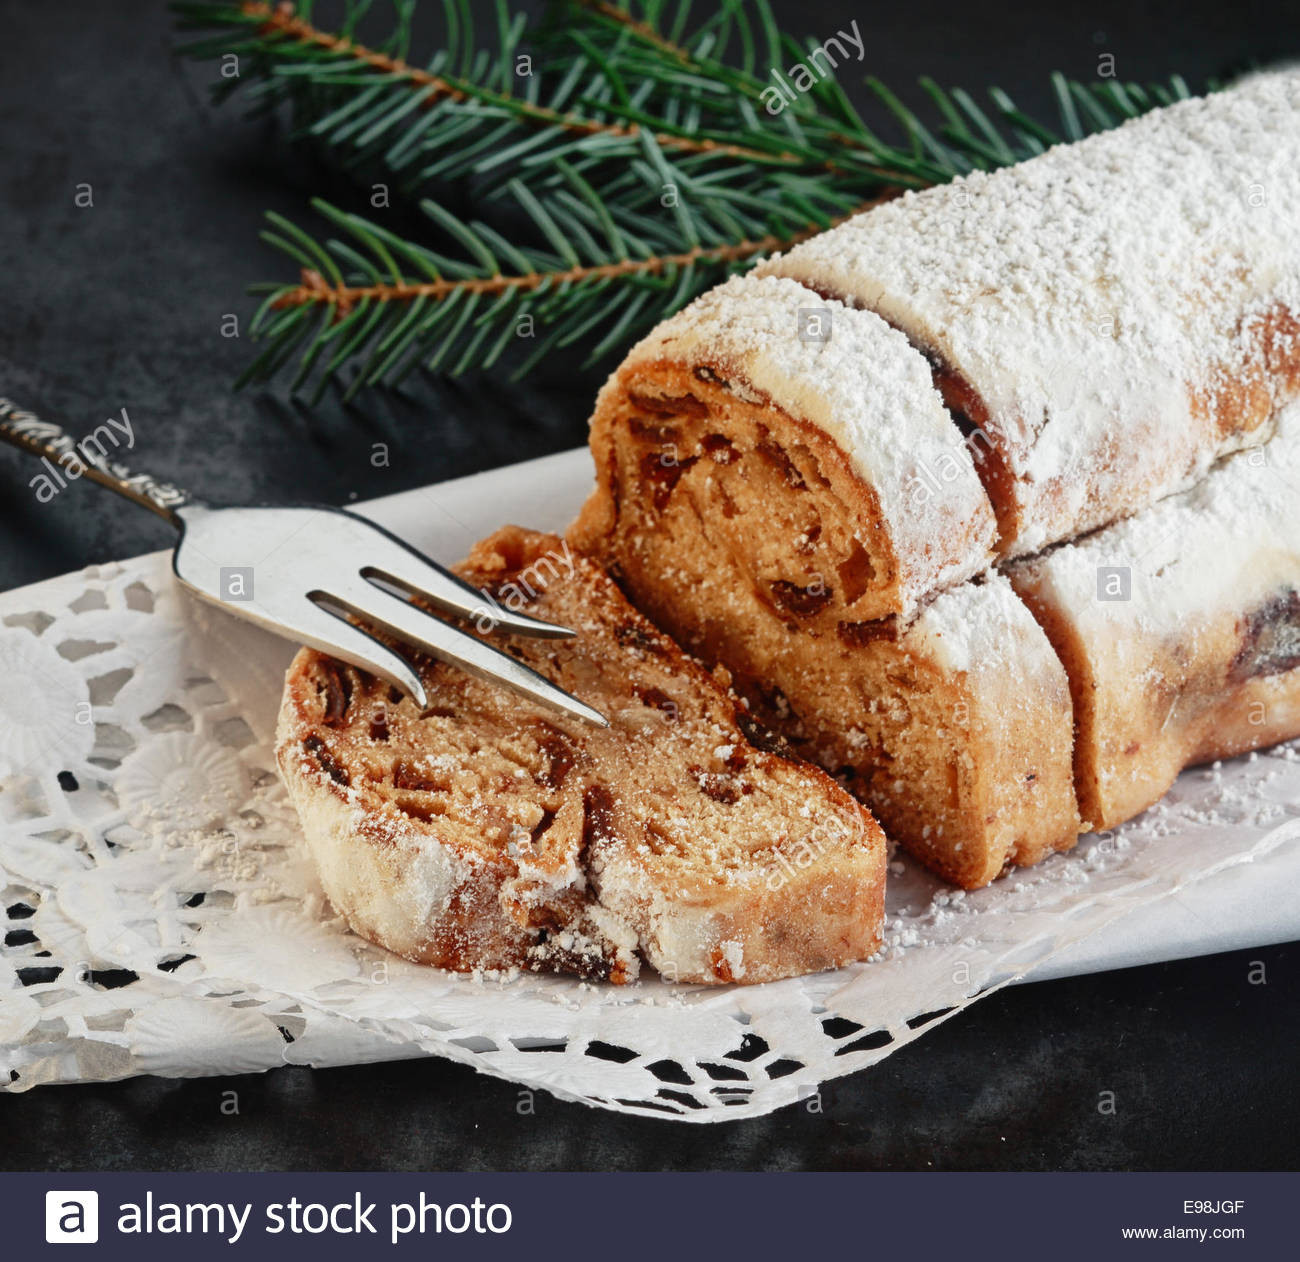 Italian Sweet Bread Loaf
 Top 21 Italian Sweet Bread Loaf Made for Christmas Most